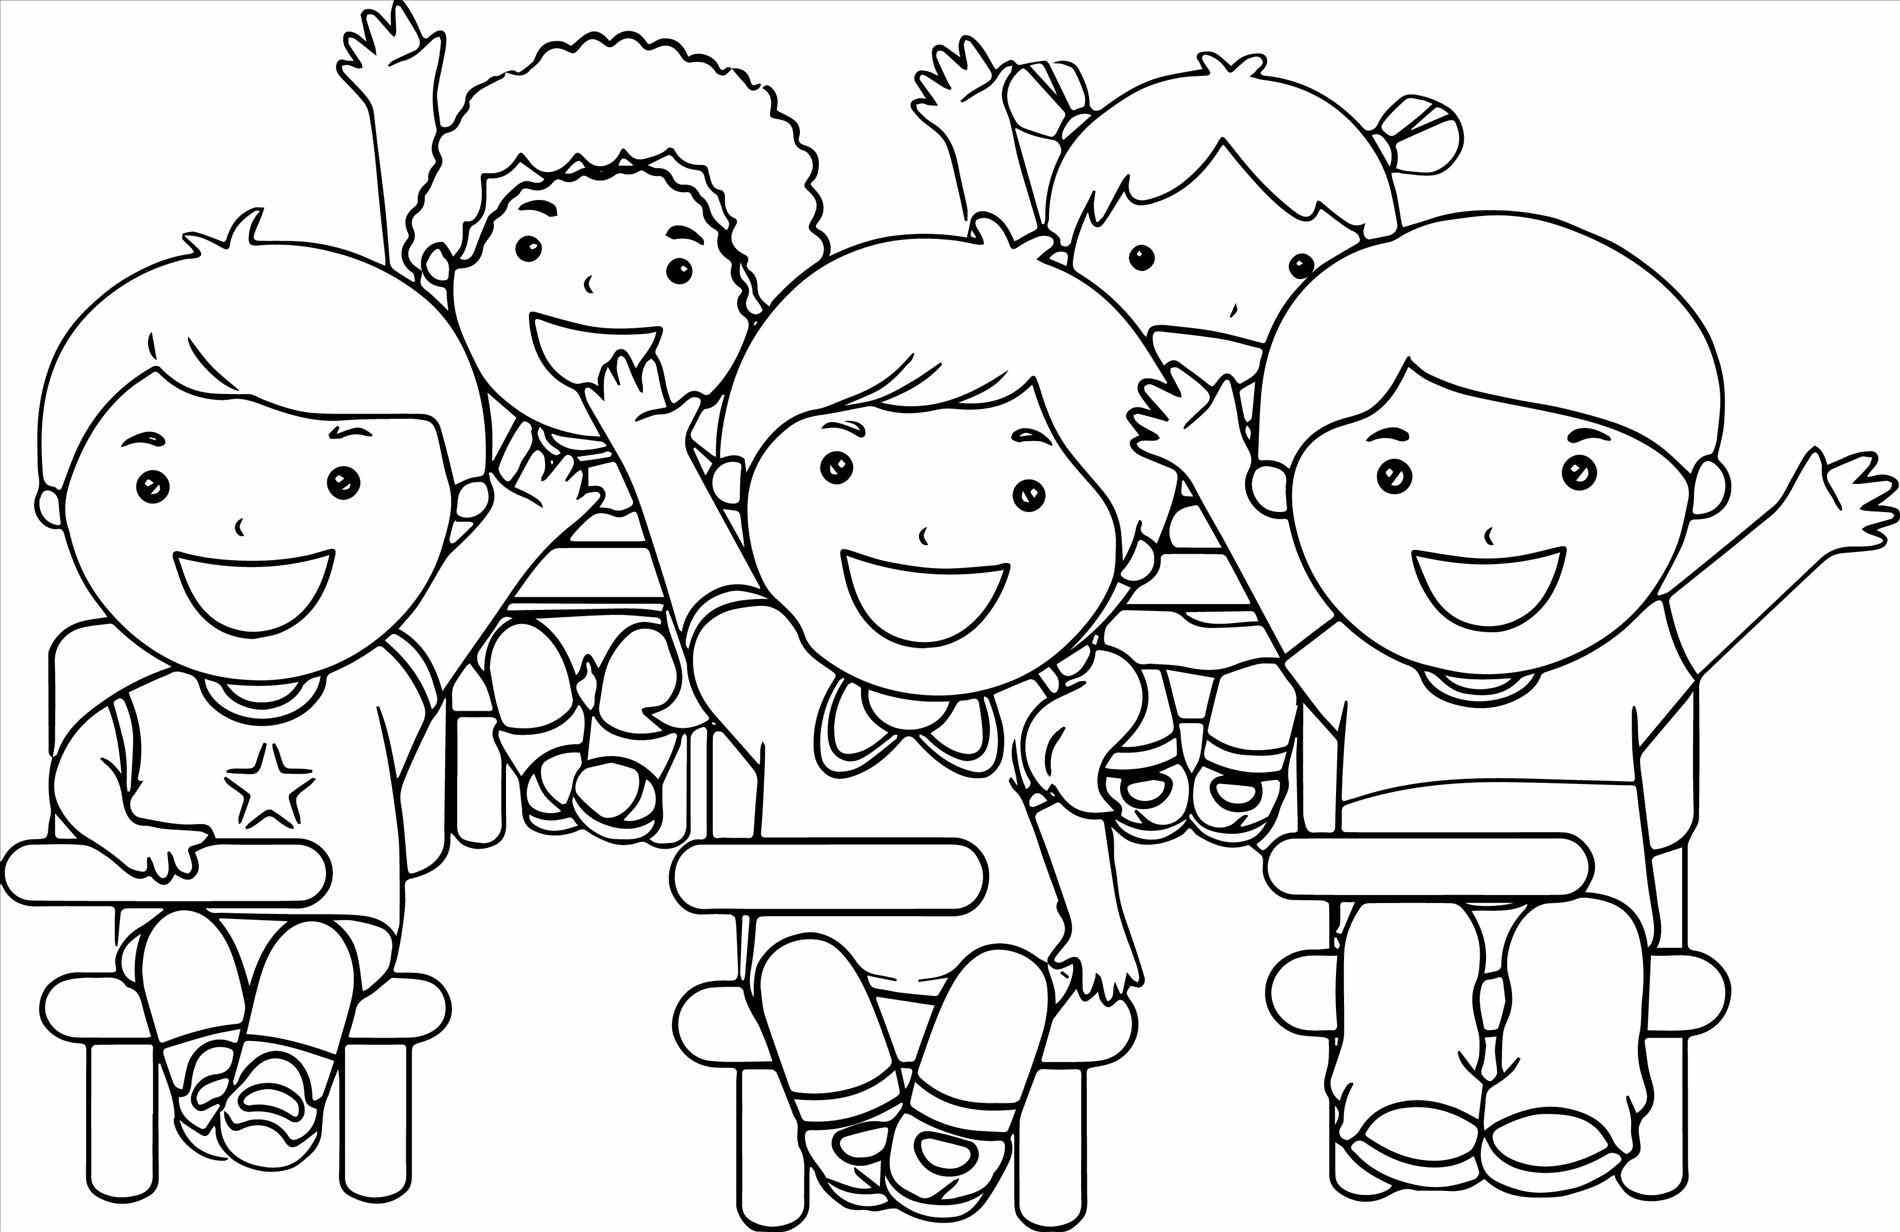 classes-for-kids-printable-free-building-School-Coloring-Page-coloring-page- classes-for-k… | School coloring pages, Sunday school coloring sheets,  Coloring for kids